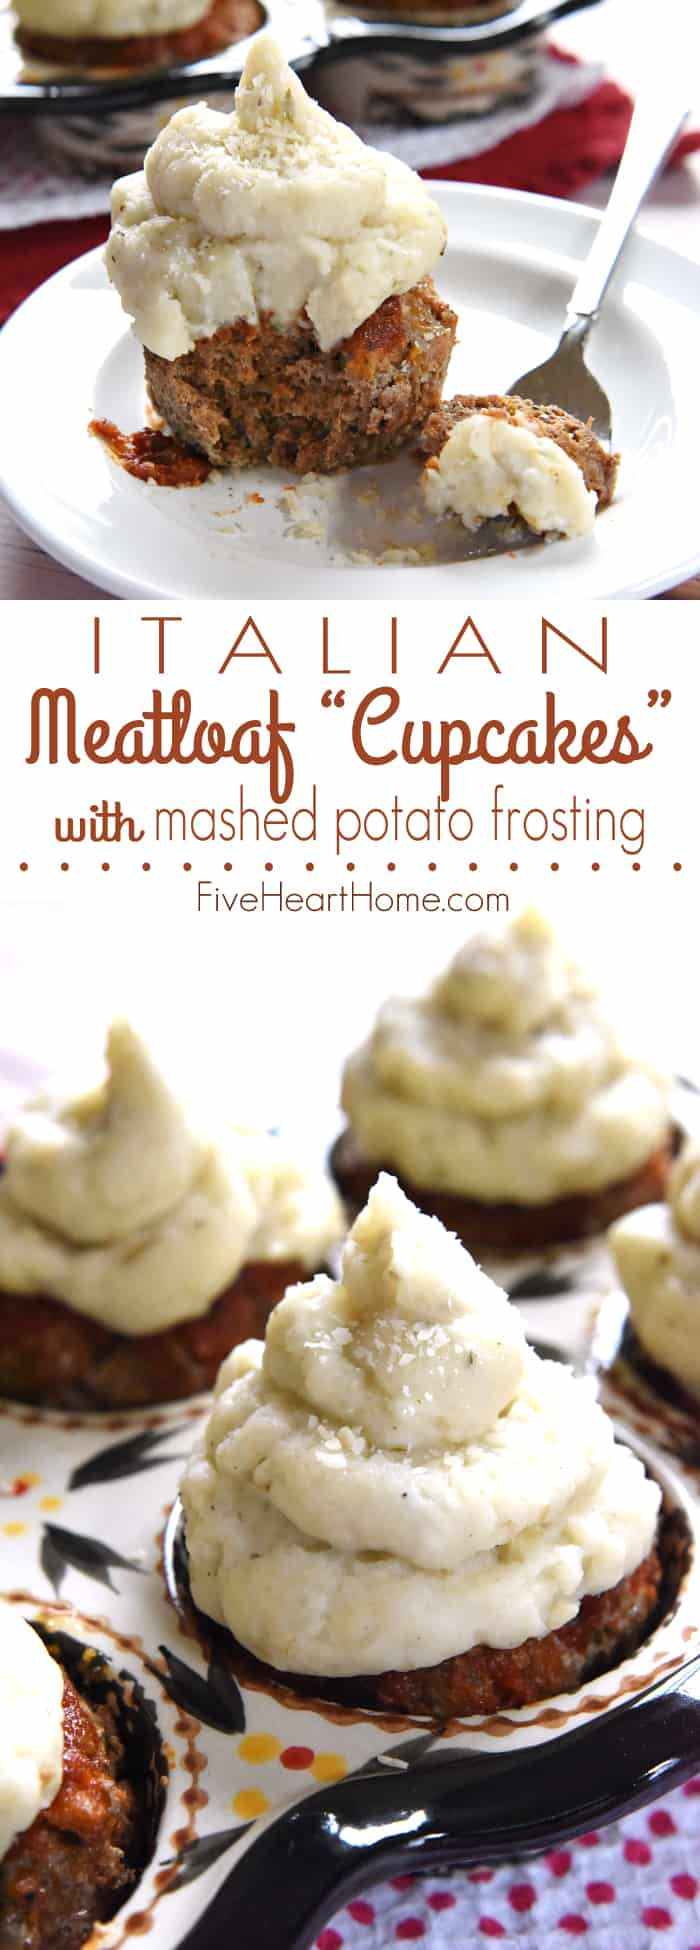 Italian Mashed Potatoes
 Italian Meatloaf “Cupcakes” with Mashed Potato Frosting